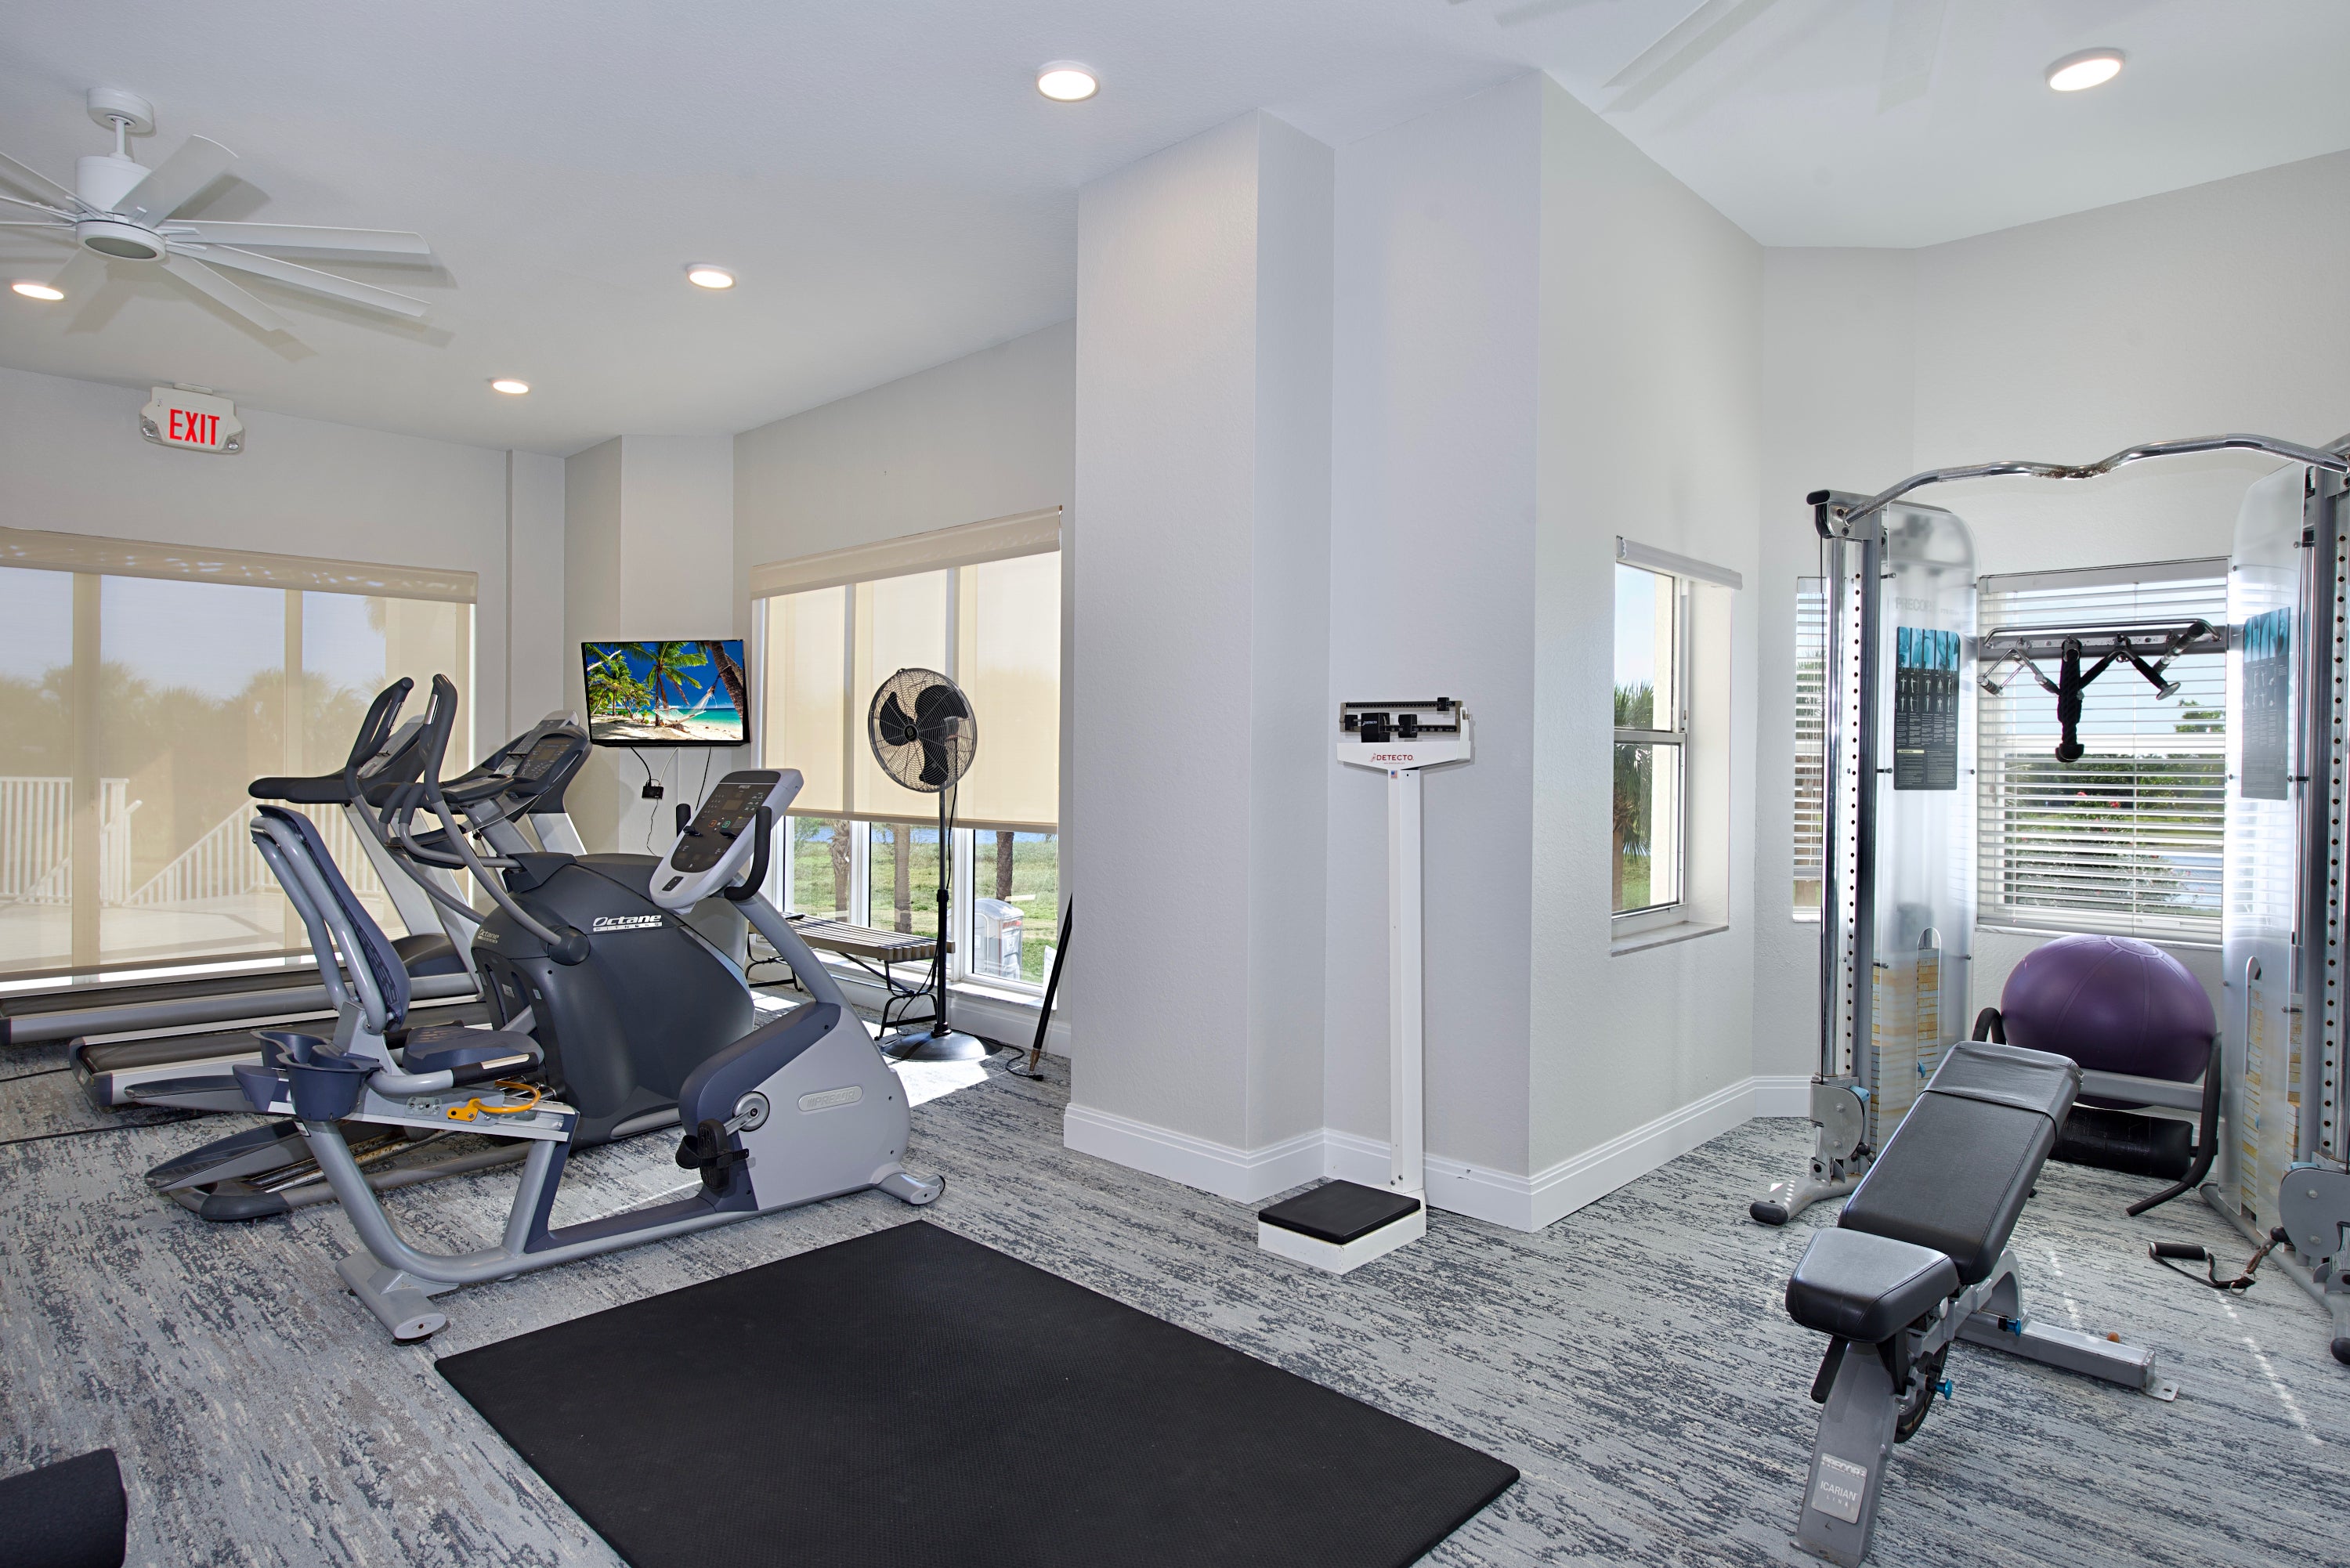 Fitness Room in building